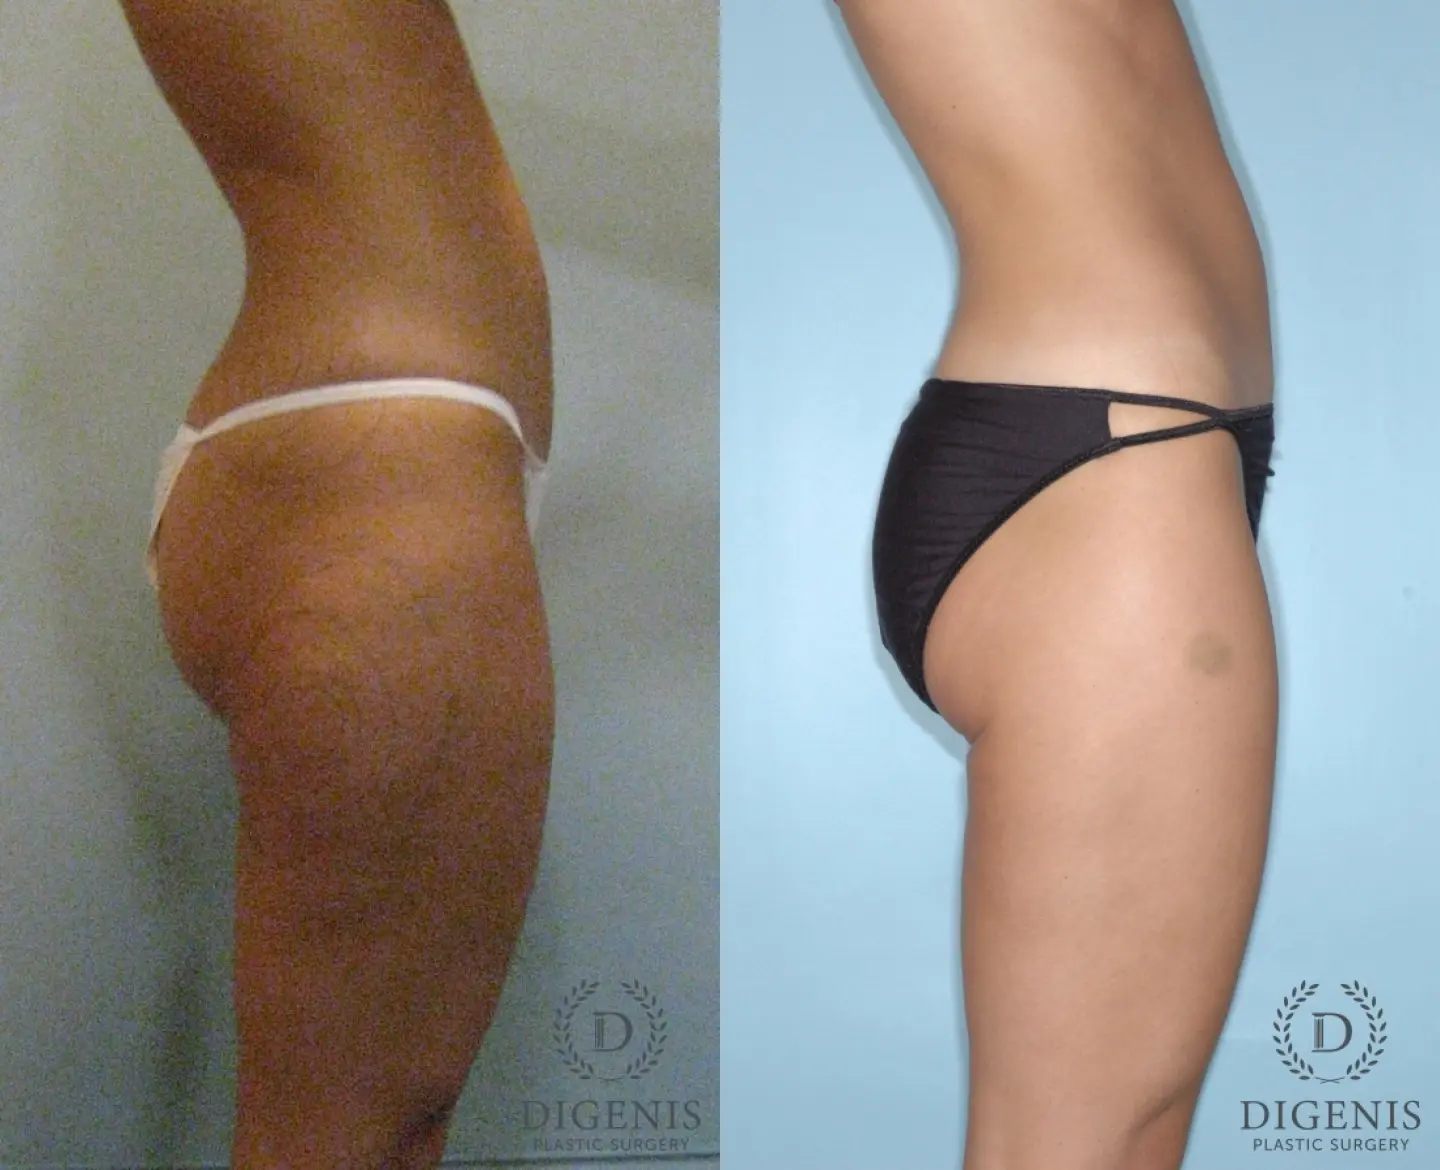 Liposuction: Patient 2 - Before and After 3